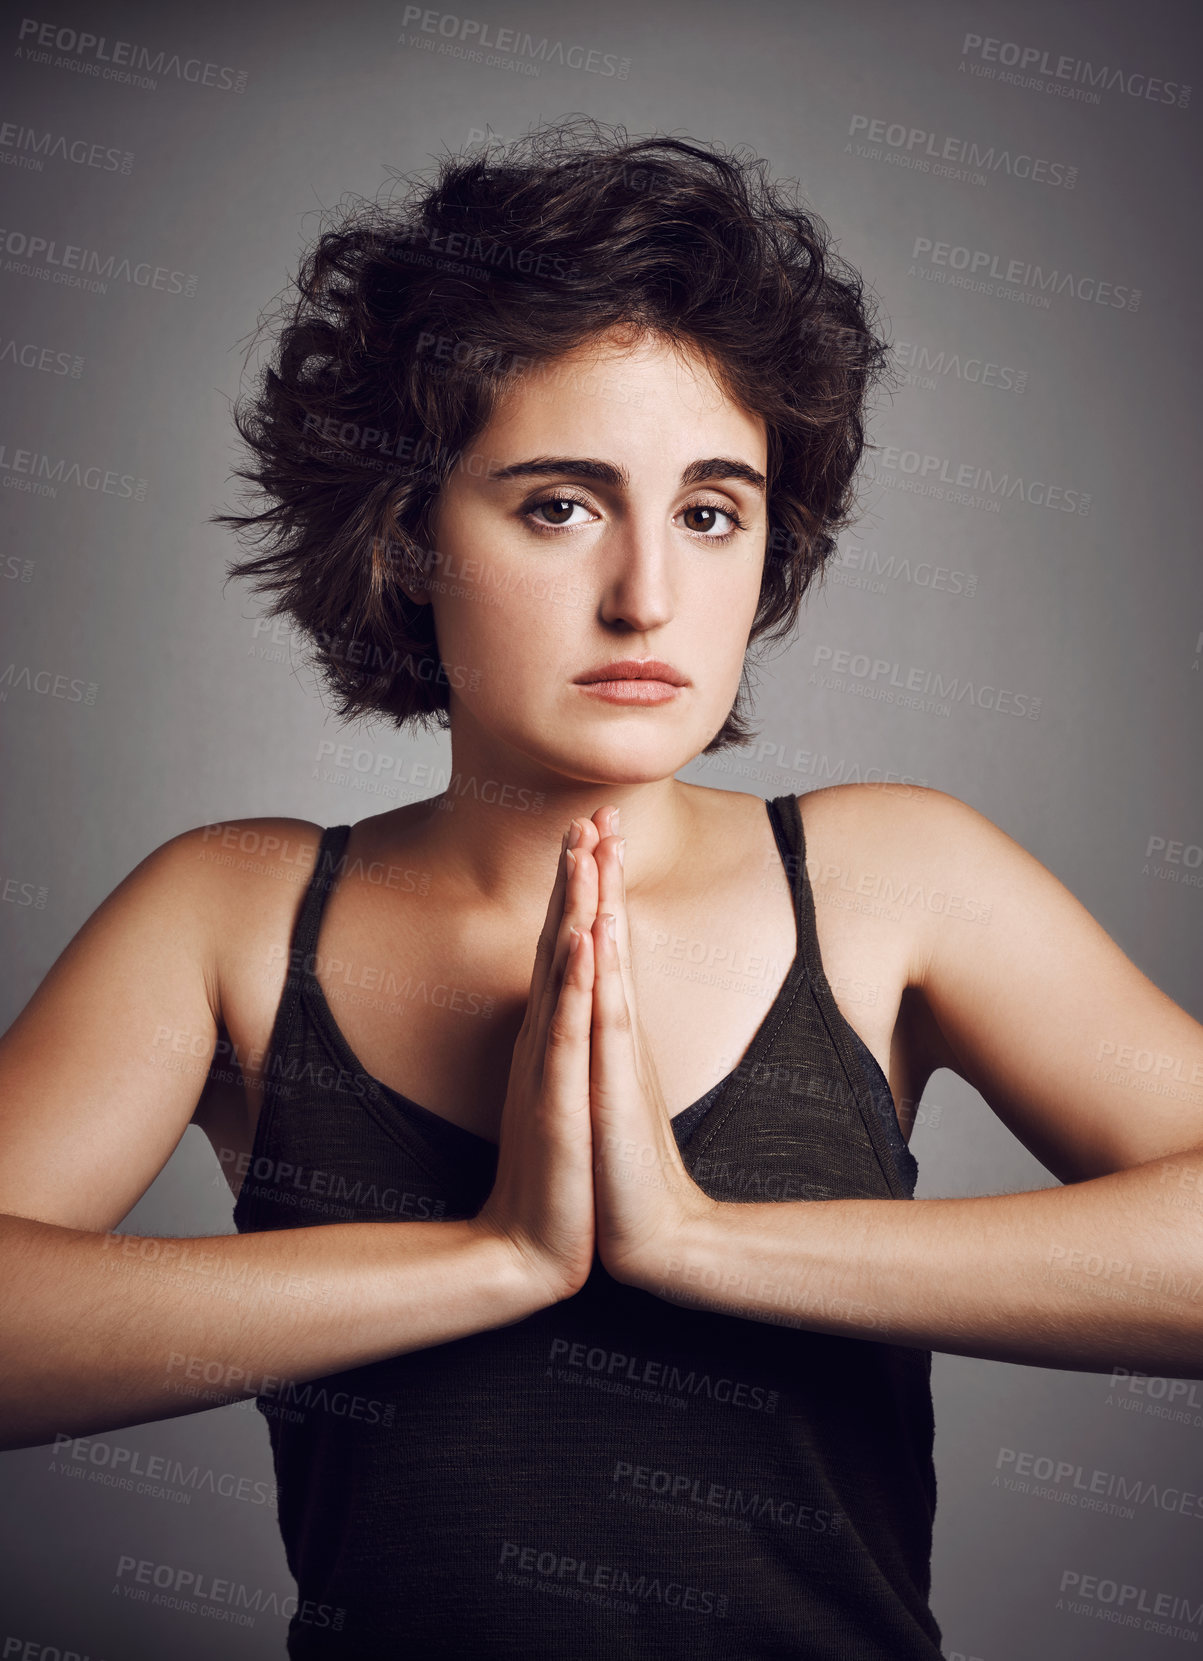 Buy stock photo Studio portrait of an attractive young woman with her hands in prayer position against a grey background